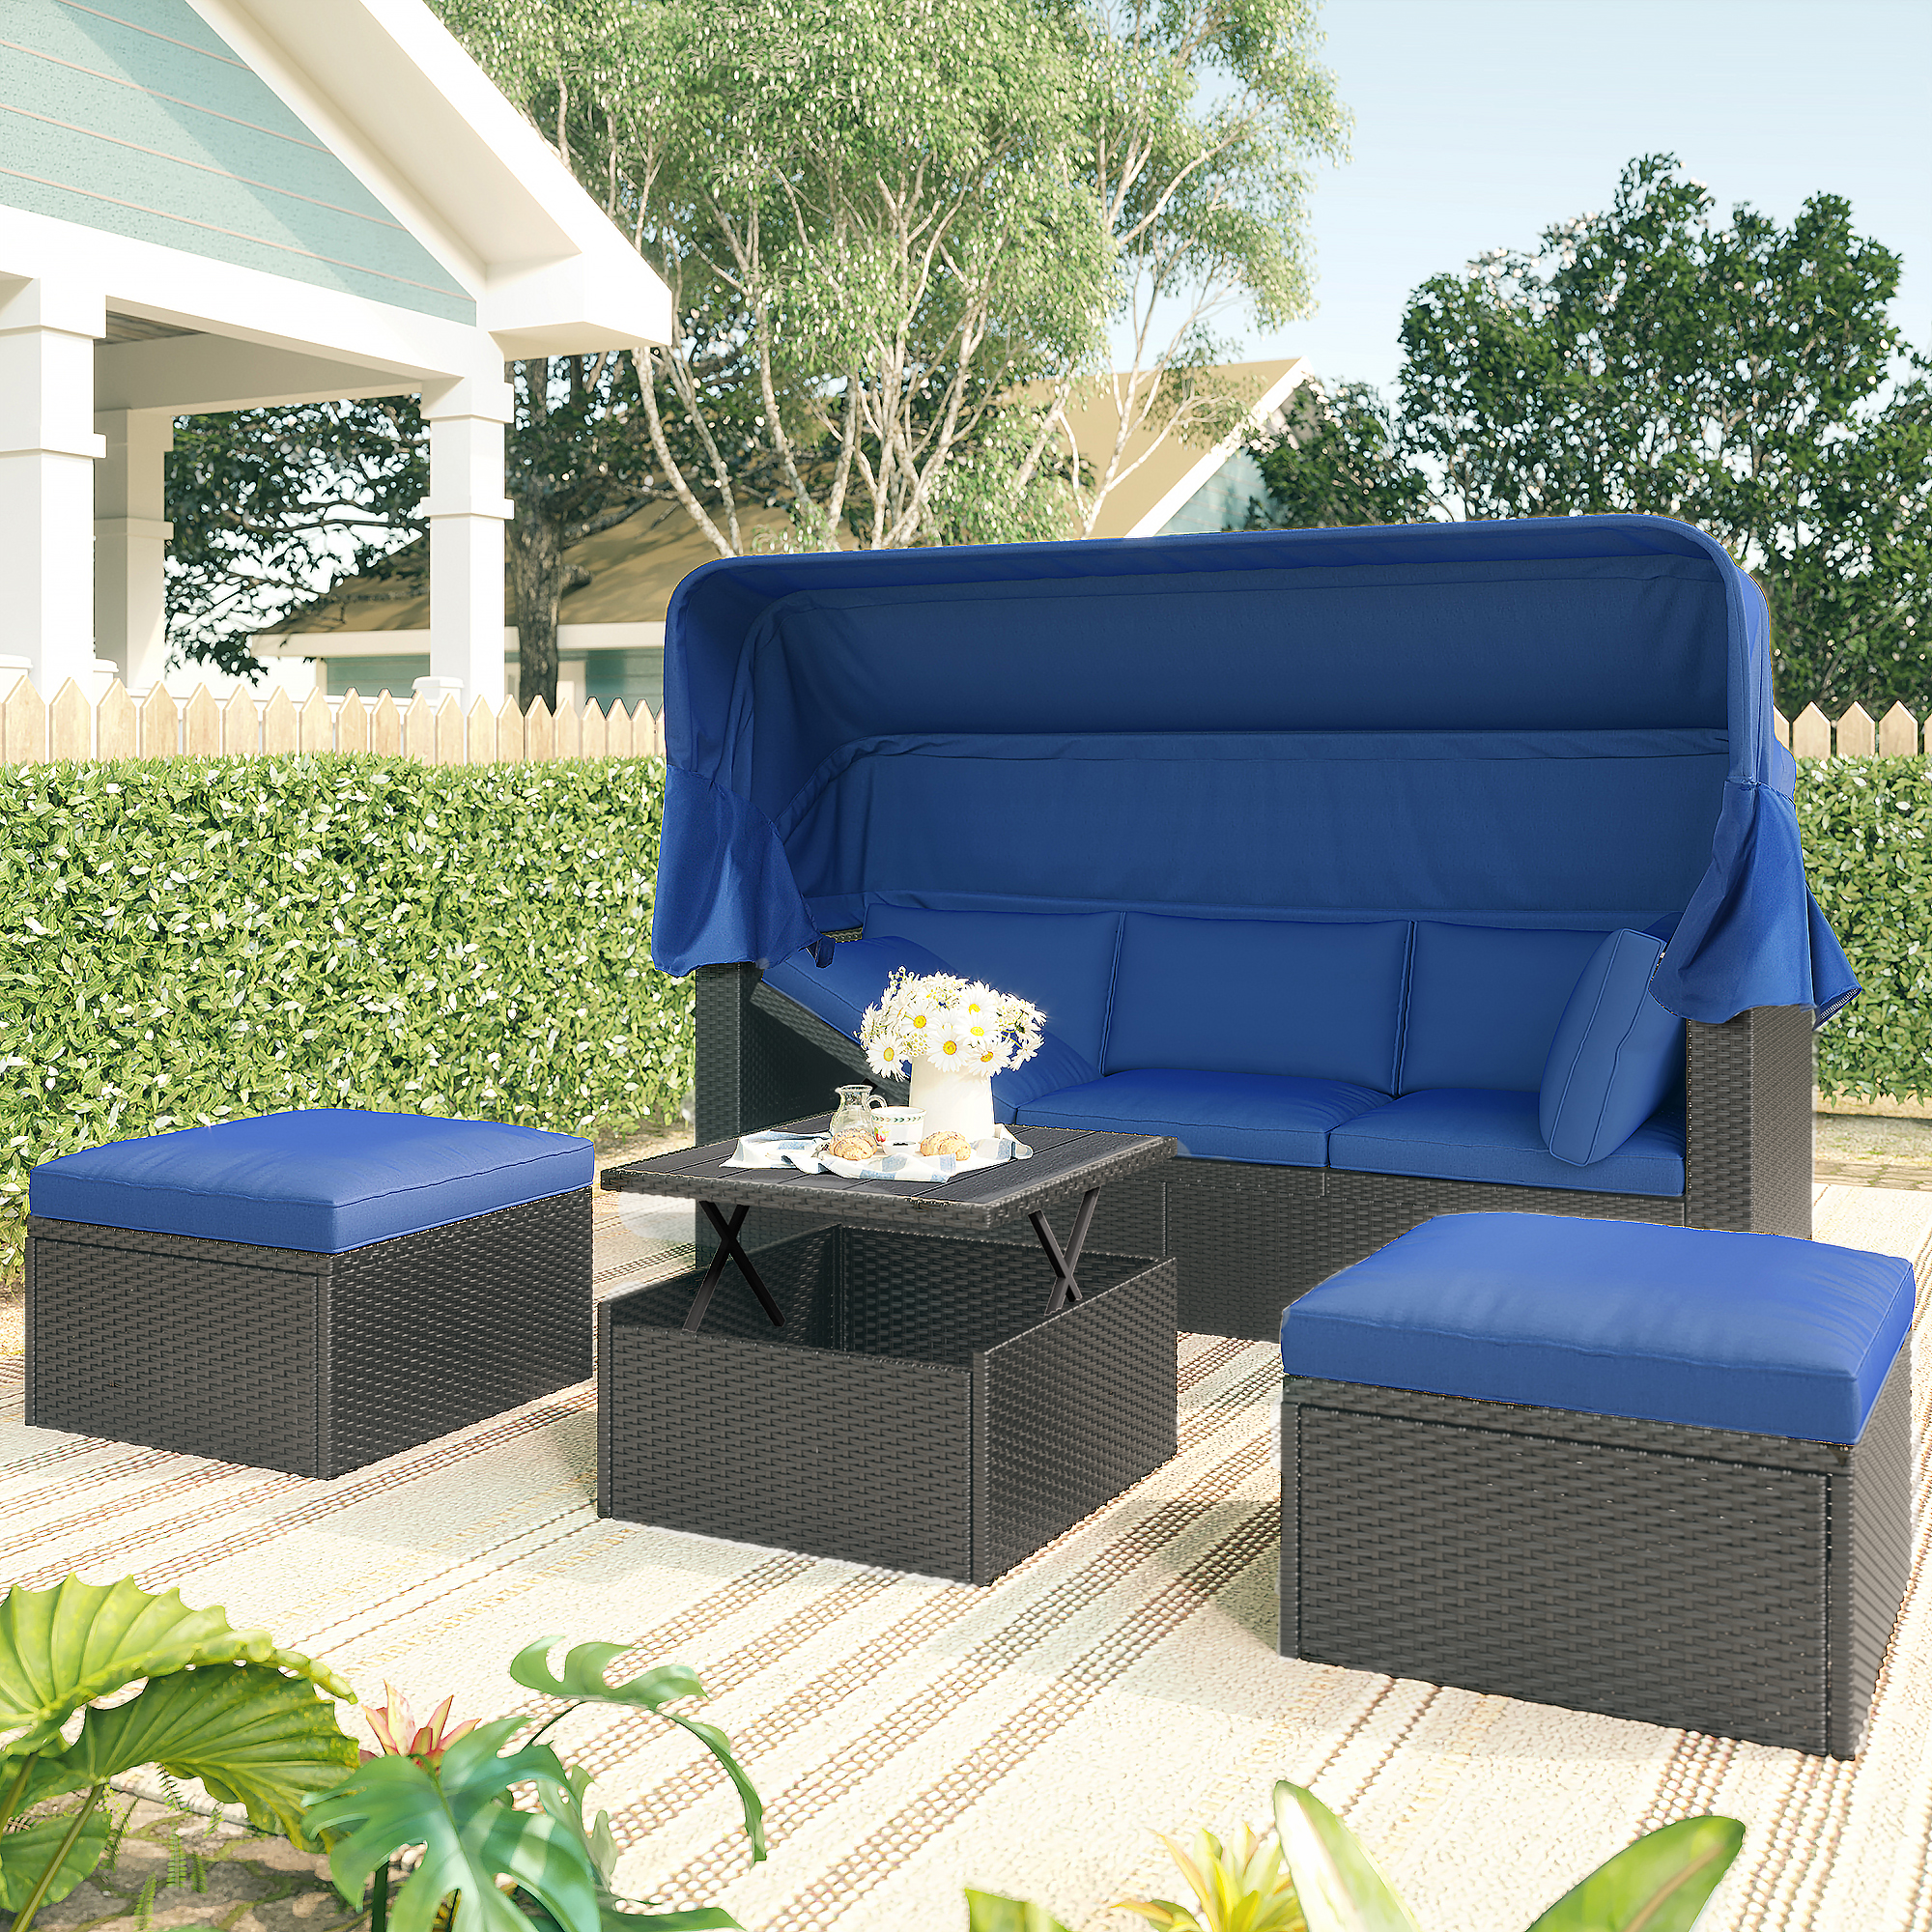 uhomepro 4 Pieces Patio Furniture Sets Daybed with Retractable Canopy, Adjustable Back, Outdoor Rattan Sectional Sofa Set with Foldable Board, Wicker Chaise Lounge for Backyard Garden Poolside, Blue - image 2 of 14